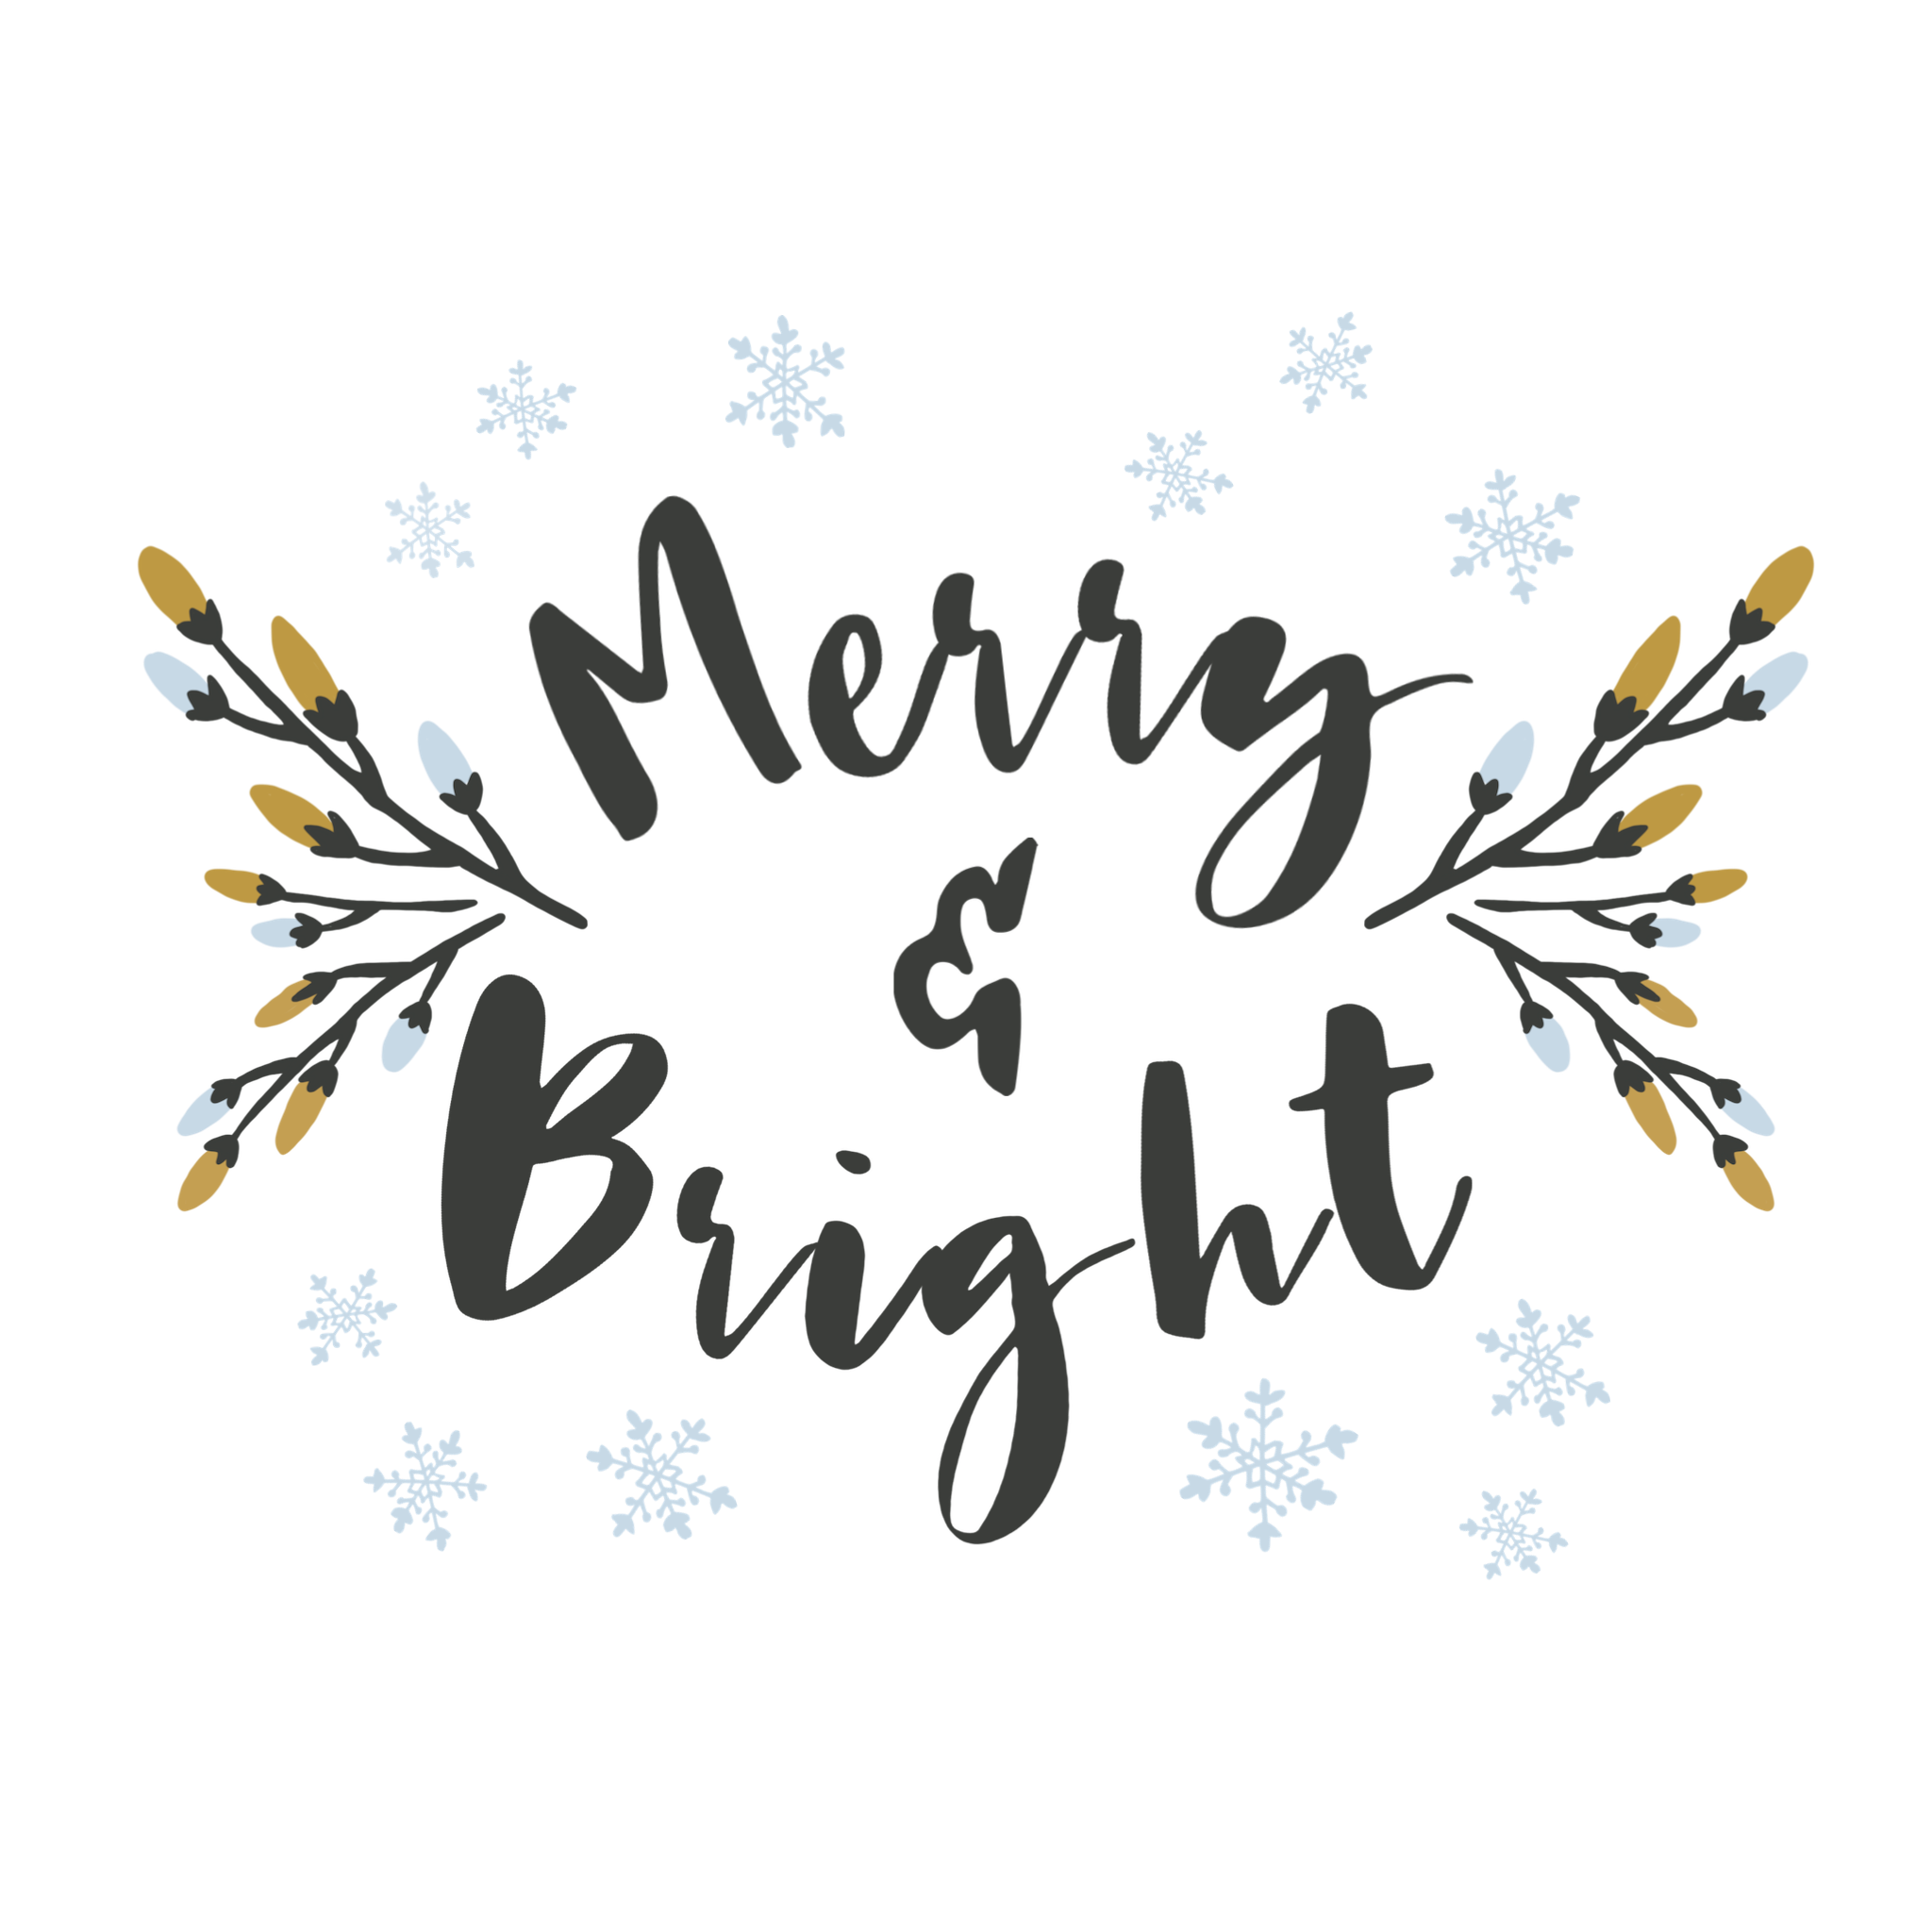 merry and bright social media Christmas holidays greetings sticker